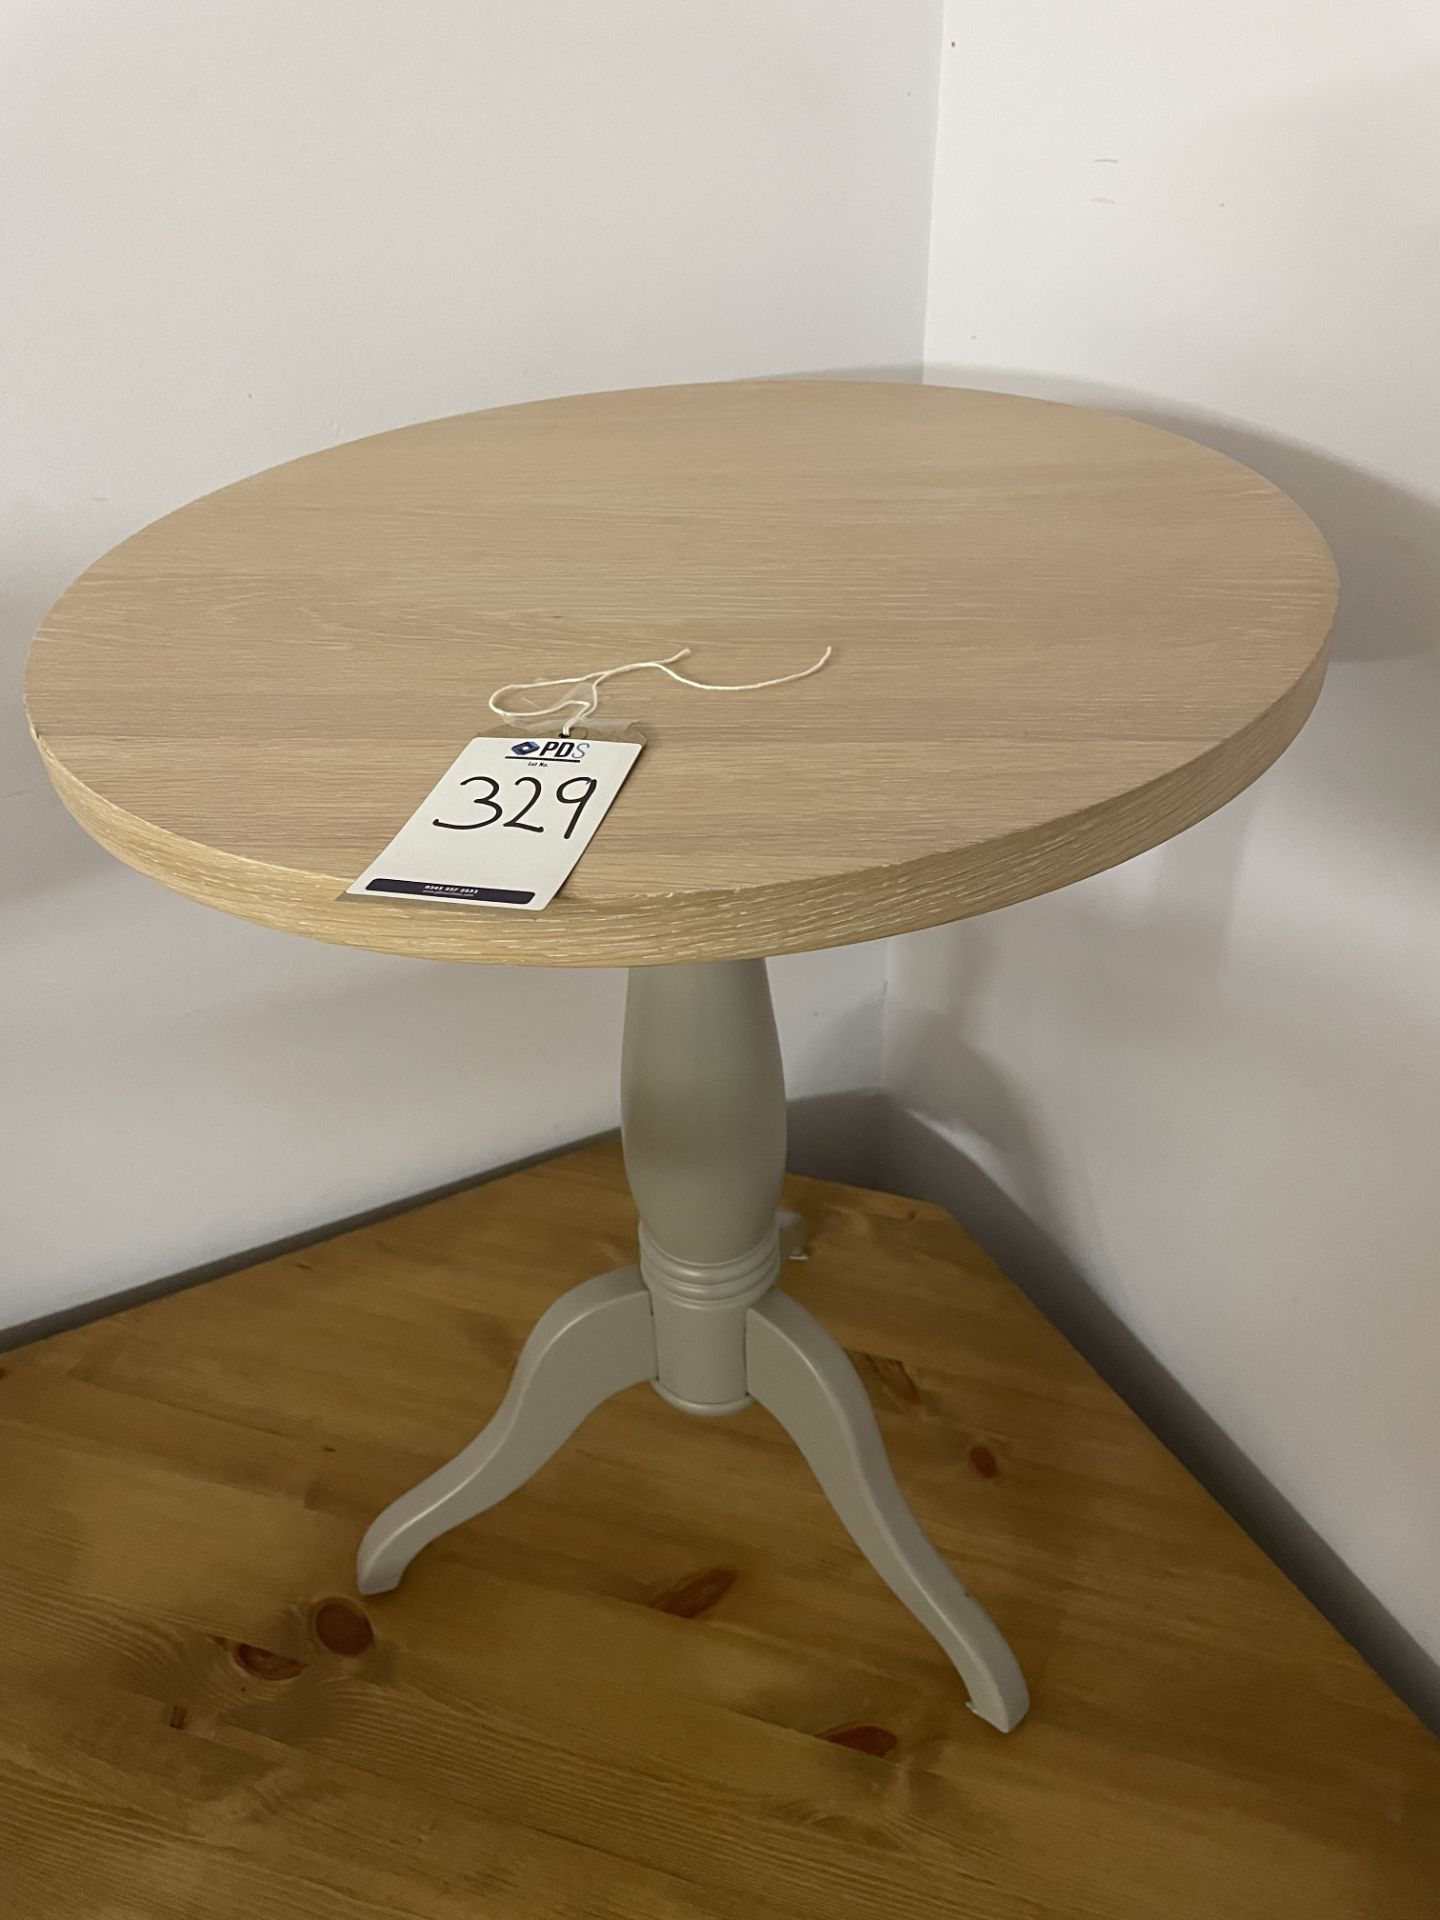 Circular Tripod Table (Slight Damage) (520mm) (Location: Hertford. Please Refer to General Notes)